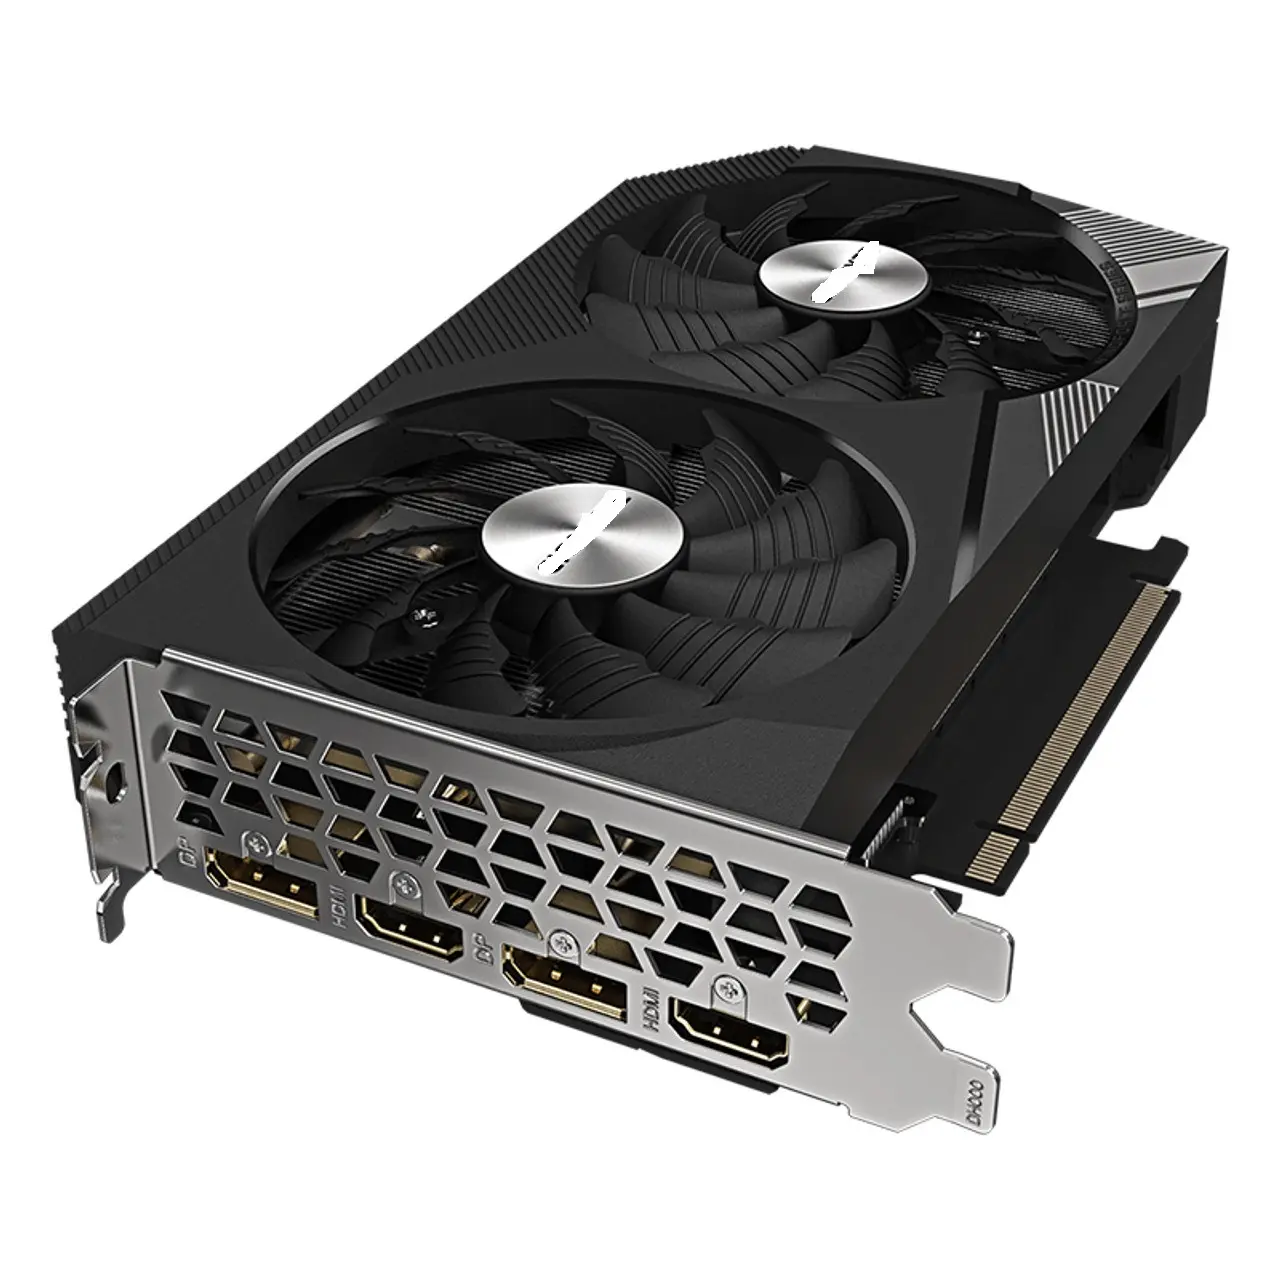 Hight Quality promo sales for Graphics Card New Sealed Pc Video RTX 3090 Ftw3 24gb Gddr6x Graphics Card available in stock buy